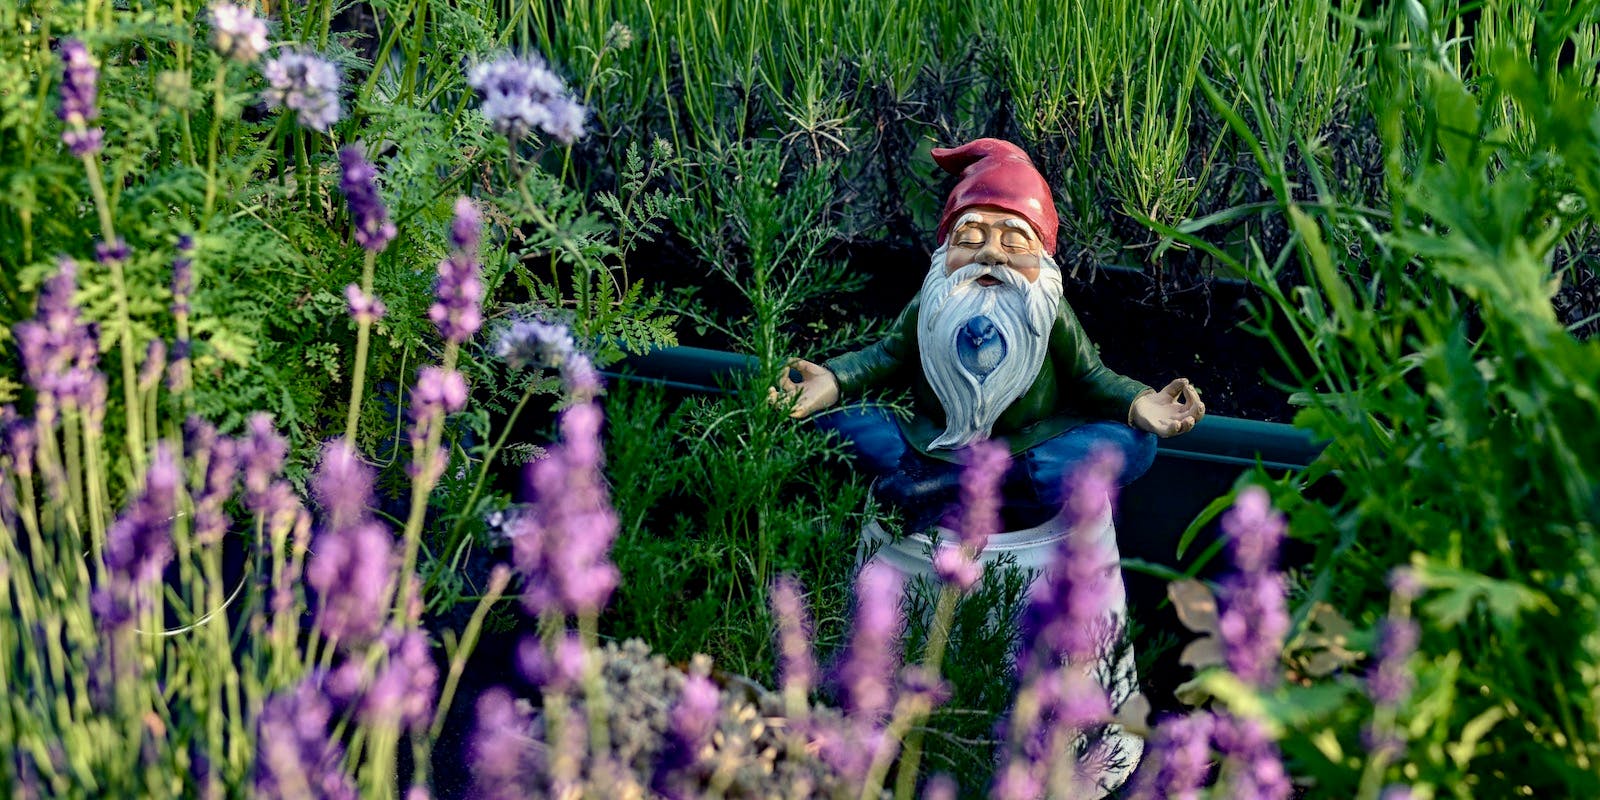 A statue of a gnome meditating sits in a field of tall grass and purple flowers